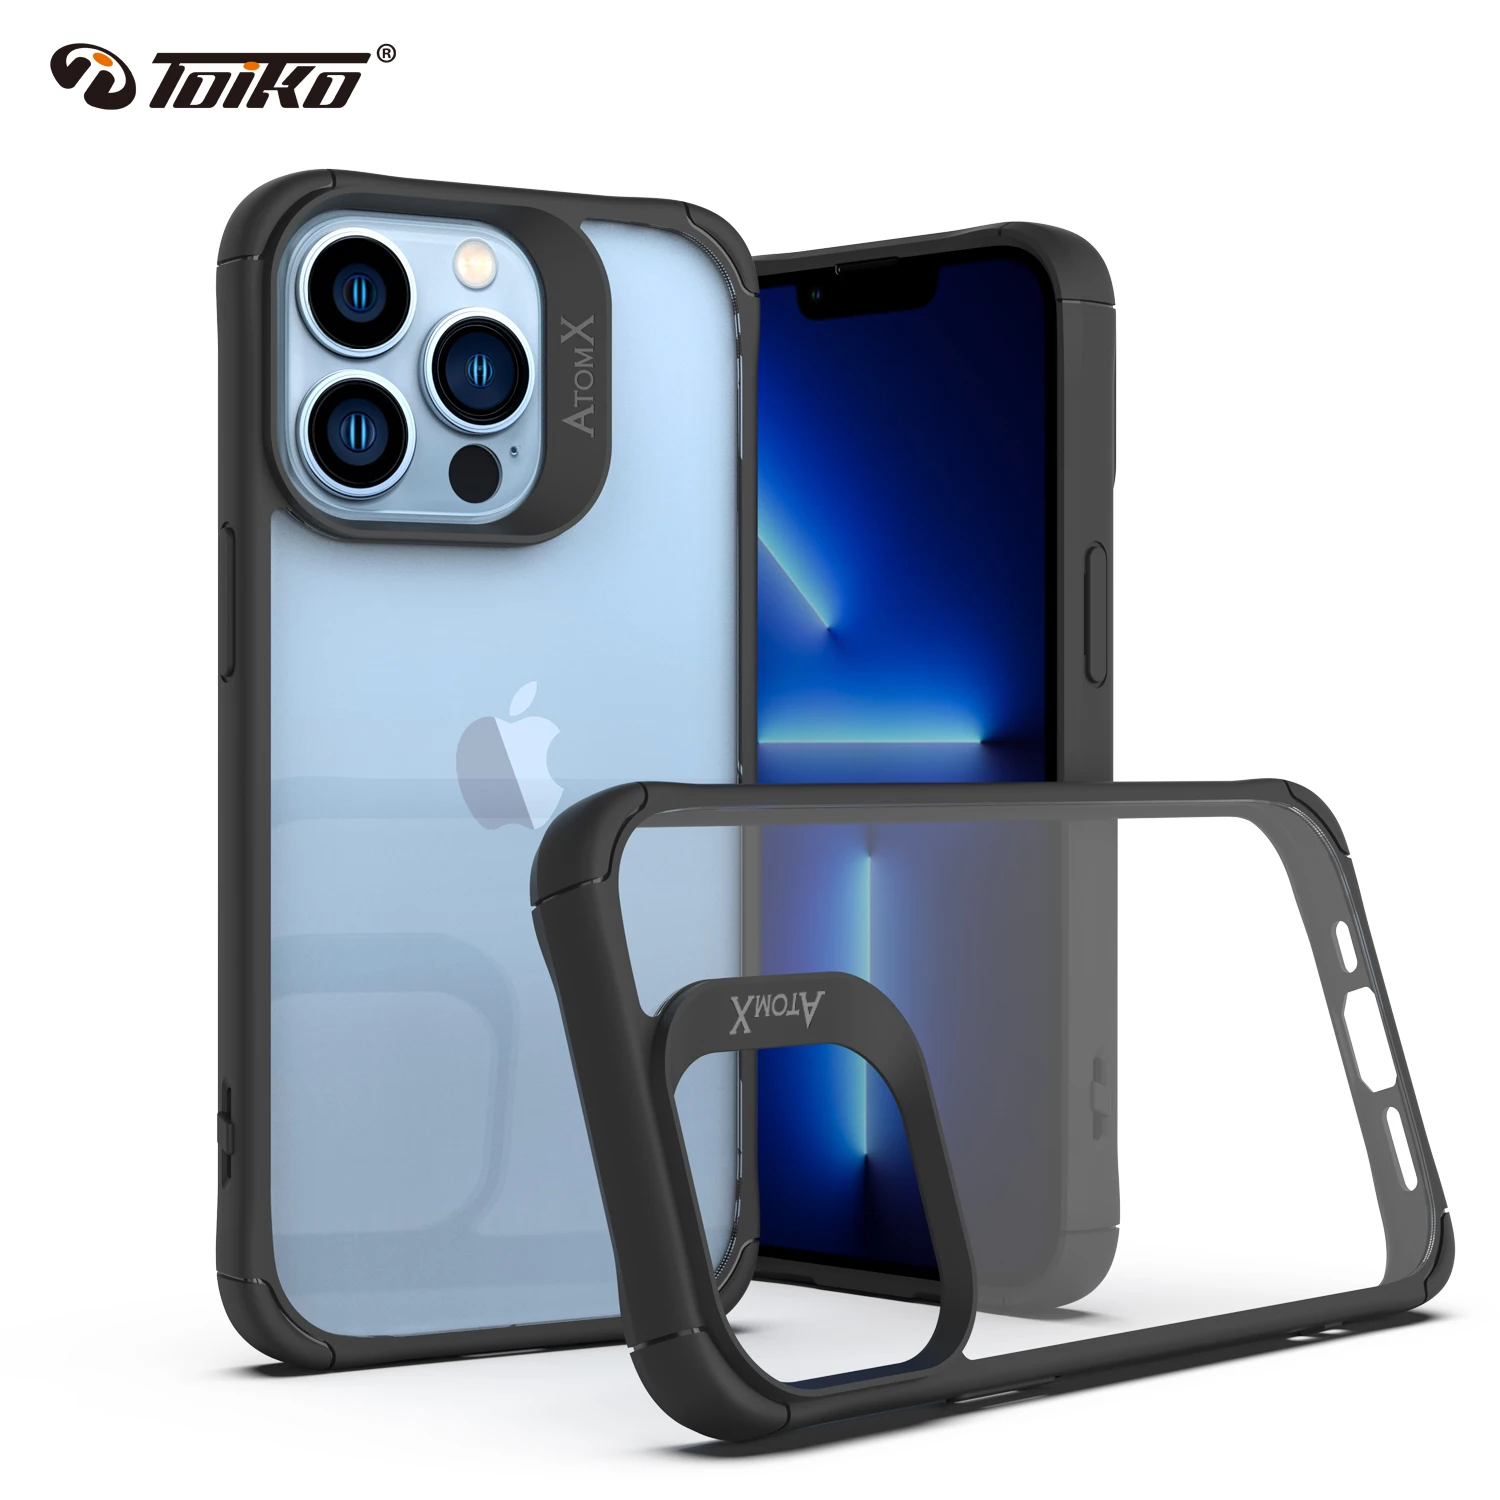 TOIKO Atom X Shockproof Protection Back Cover for iPhone 13 Pro Max Case Hard PC Soft TPU Hybrid Shell 13 Mini Airbag Bumper New